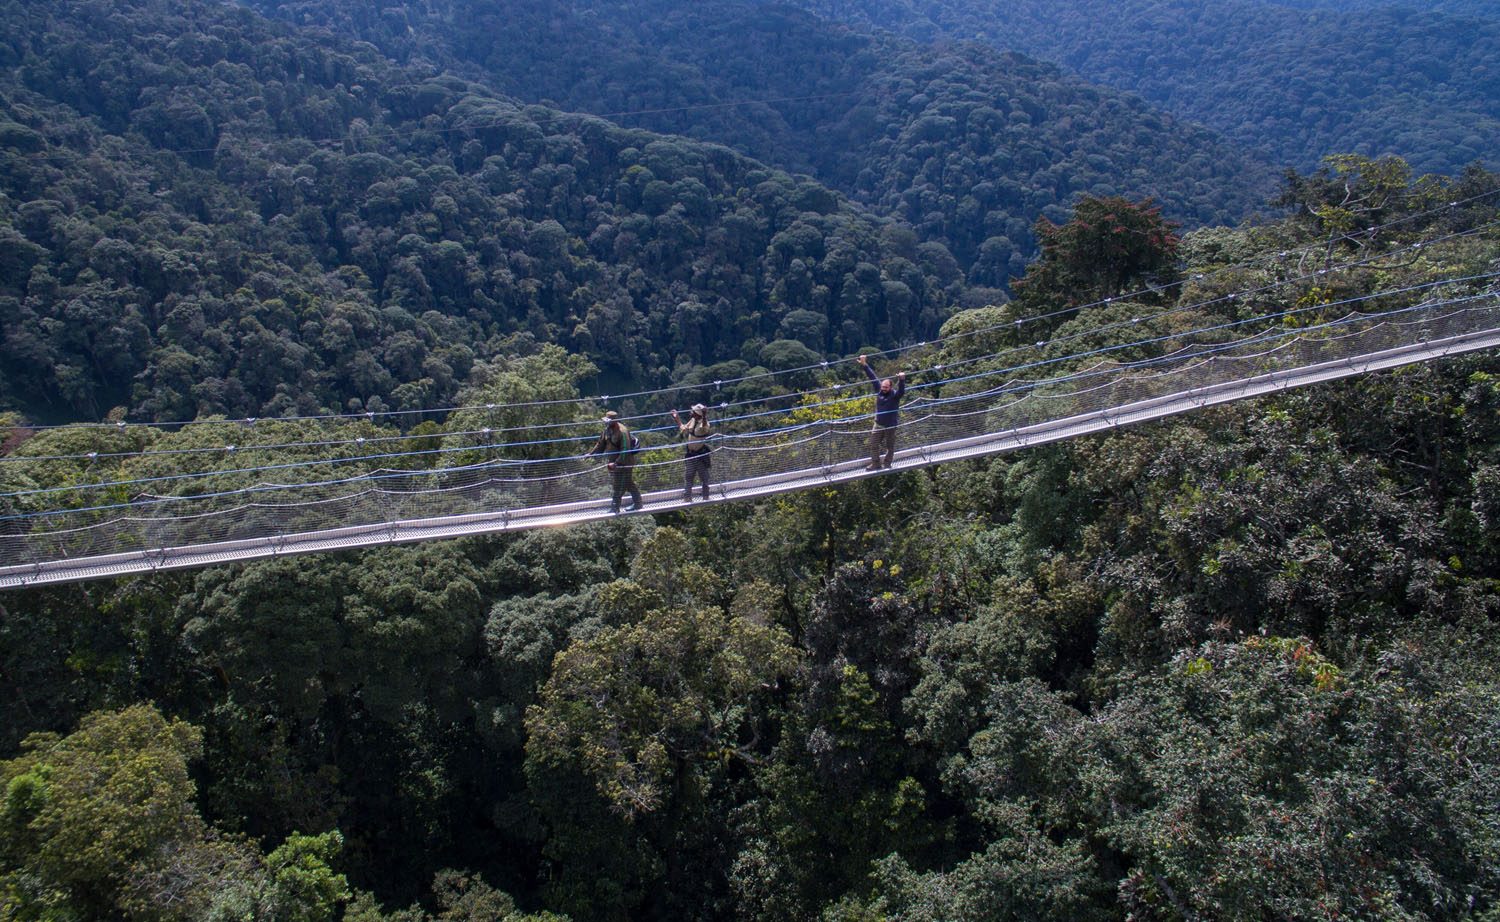 How to Get to Nyungwe Forest National Park